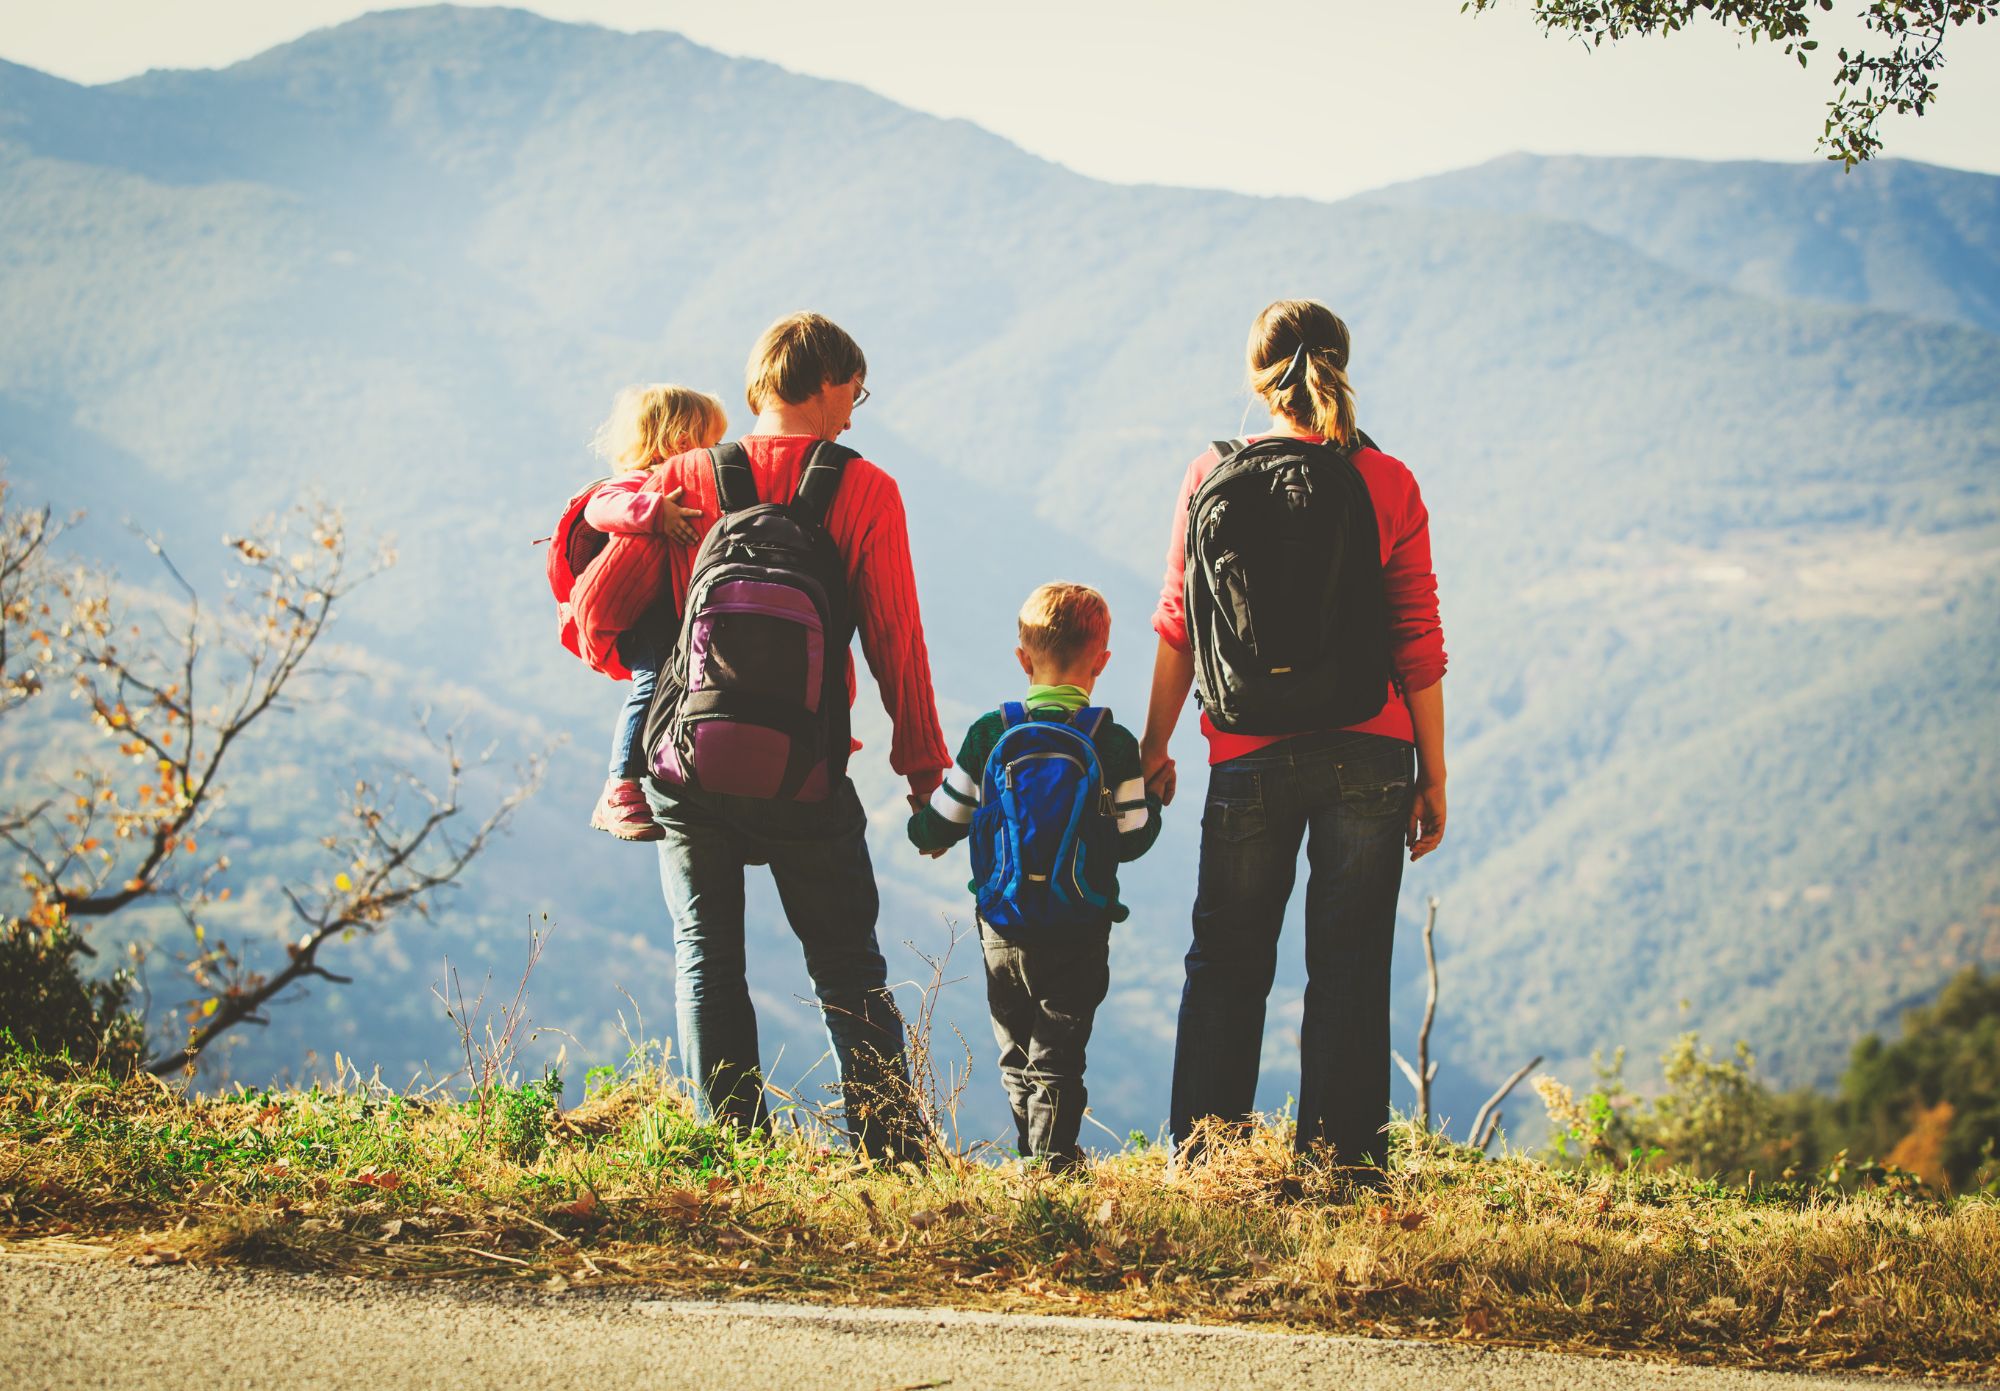 Family-Friendly Hiking: Exploring Nature with Kids in the Summer